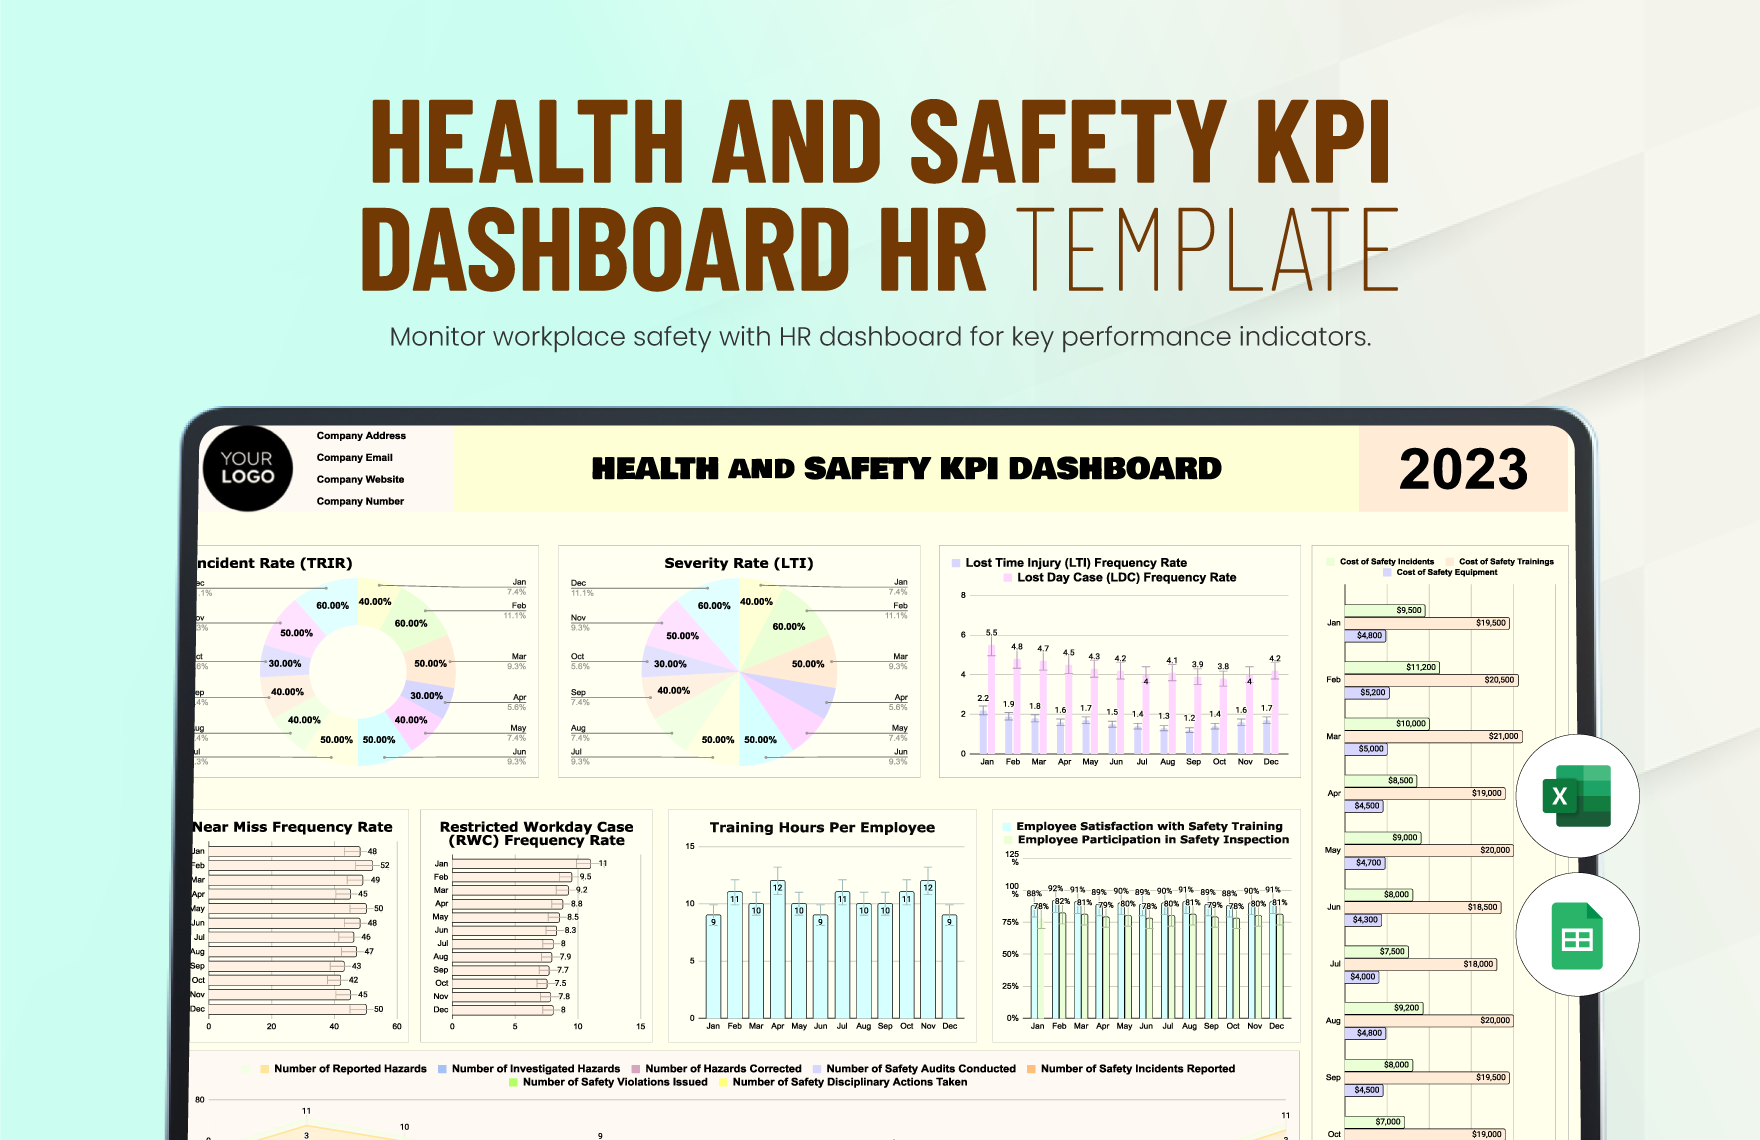 Health and Safety KPI Dashboard HR Template